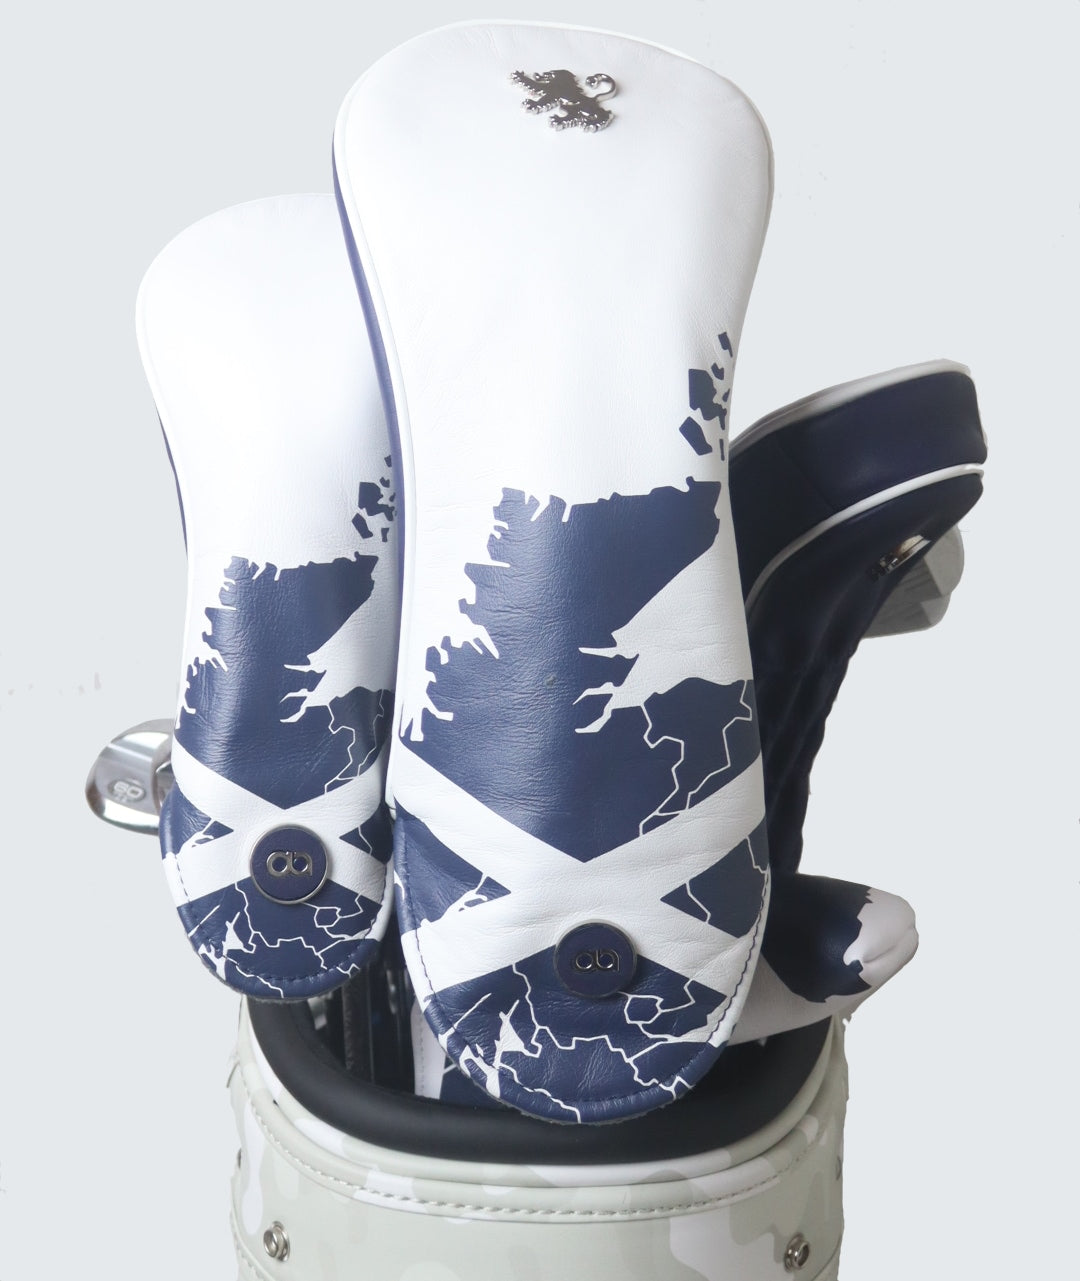 Sett of Scotland white and navy blue leather headcovers by David Alexander